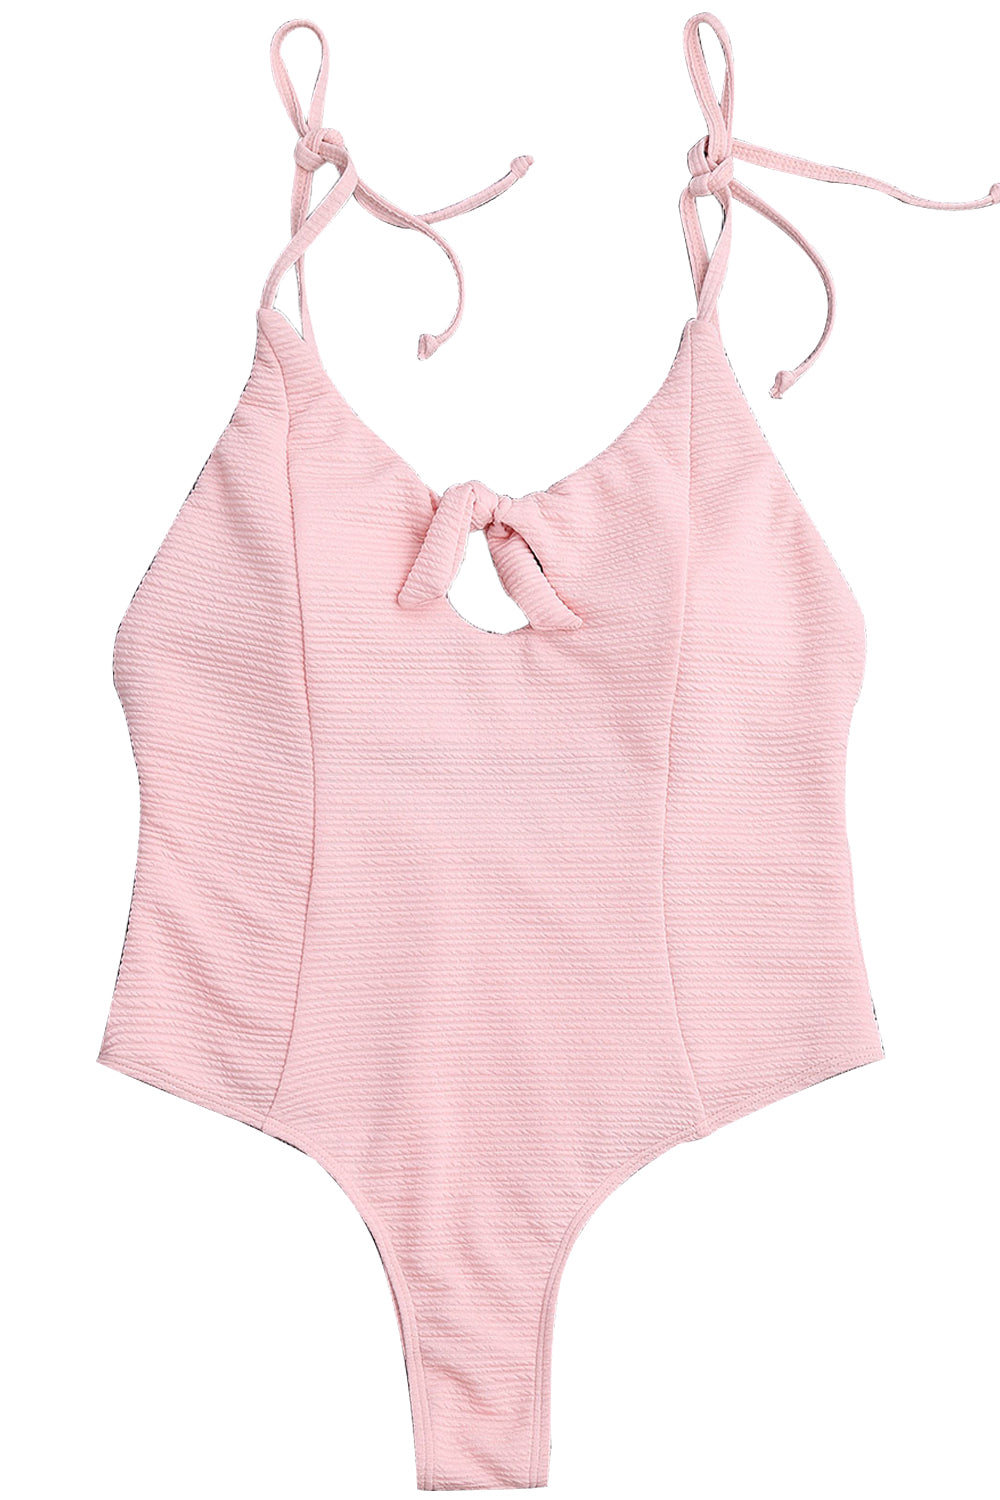 Iyasson Pink Solid Color Halter One-piece Swimsuit